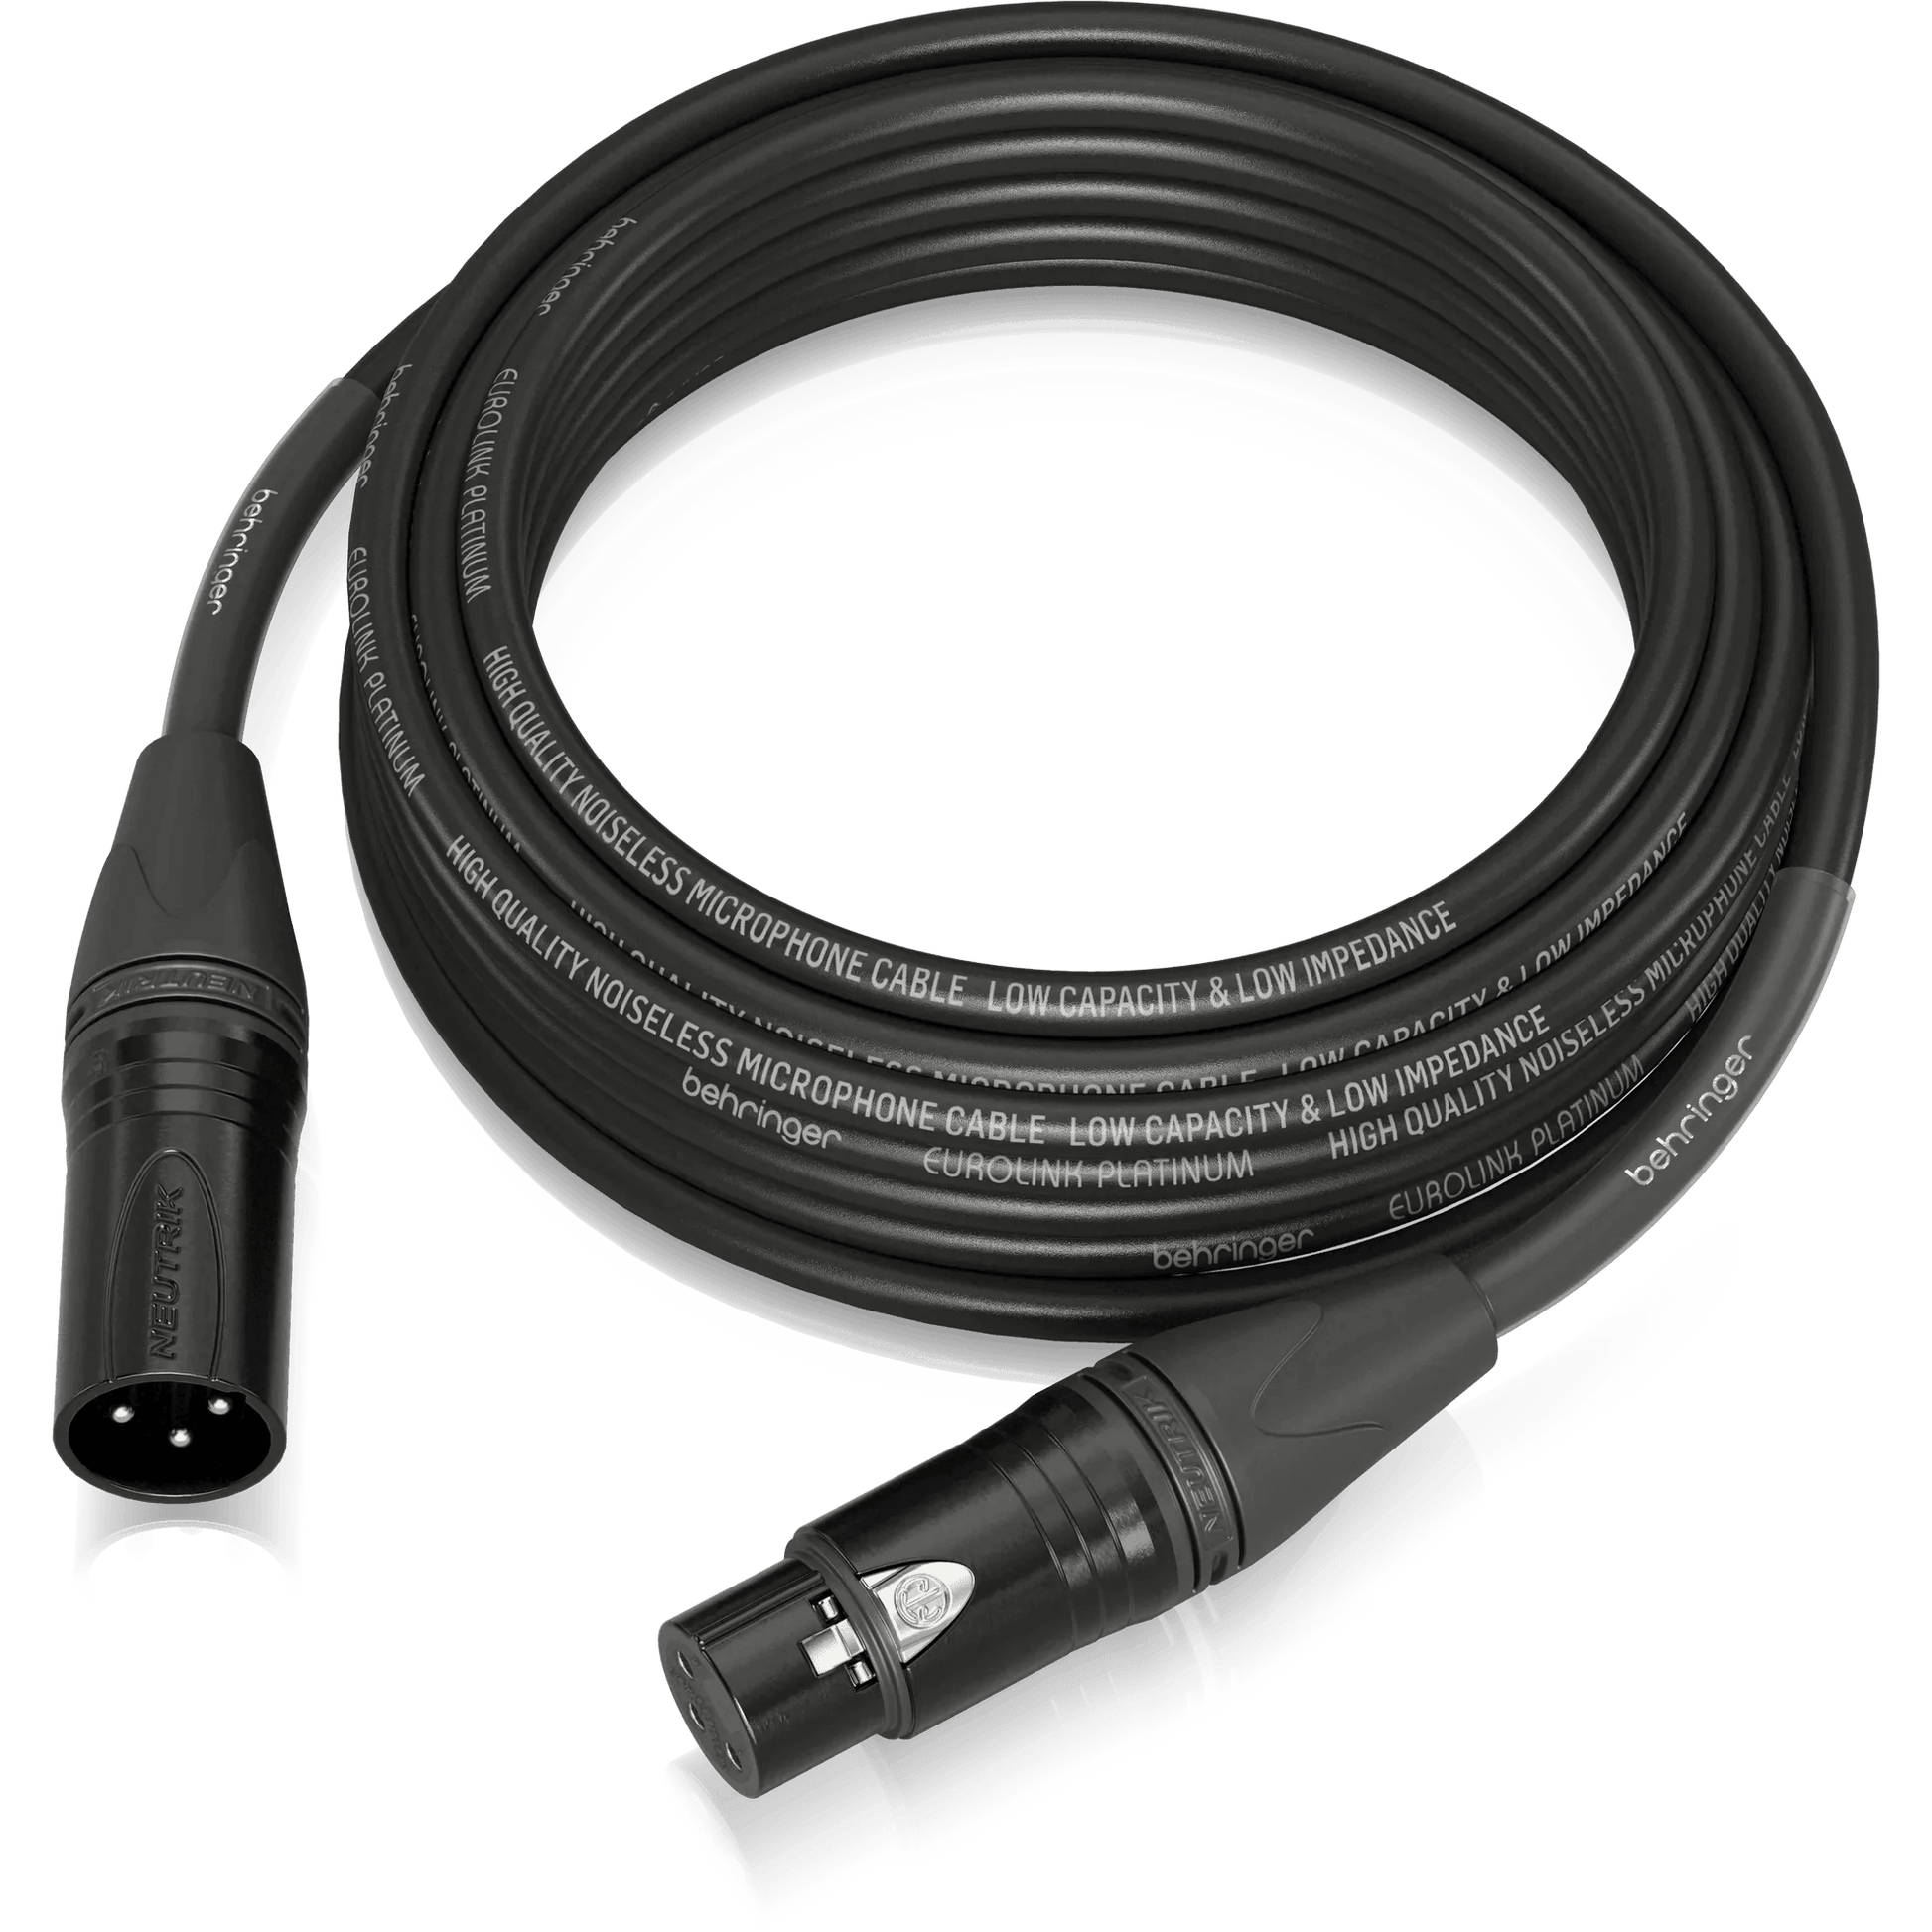 Behringer PMC-1000 Platinum Performance 10 m (32.8 ft) Microphone Cable with XLR Connectors